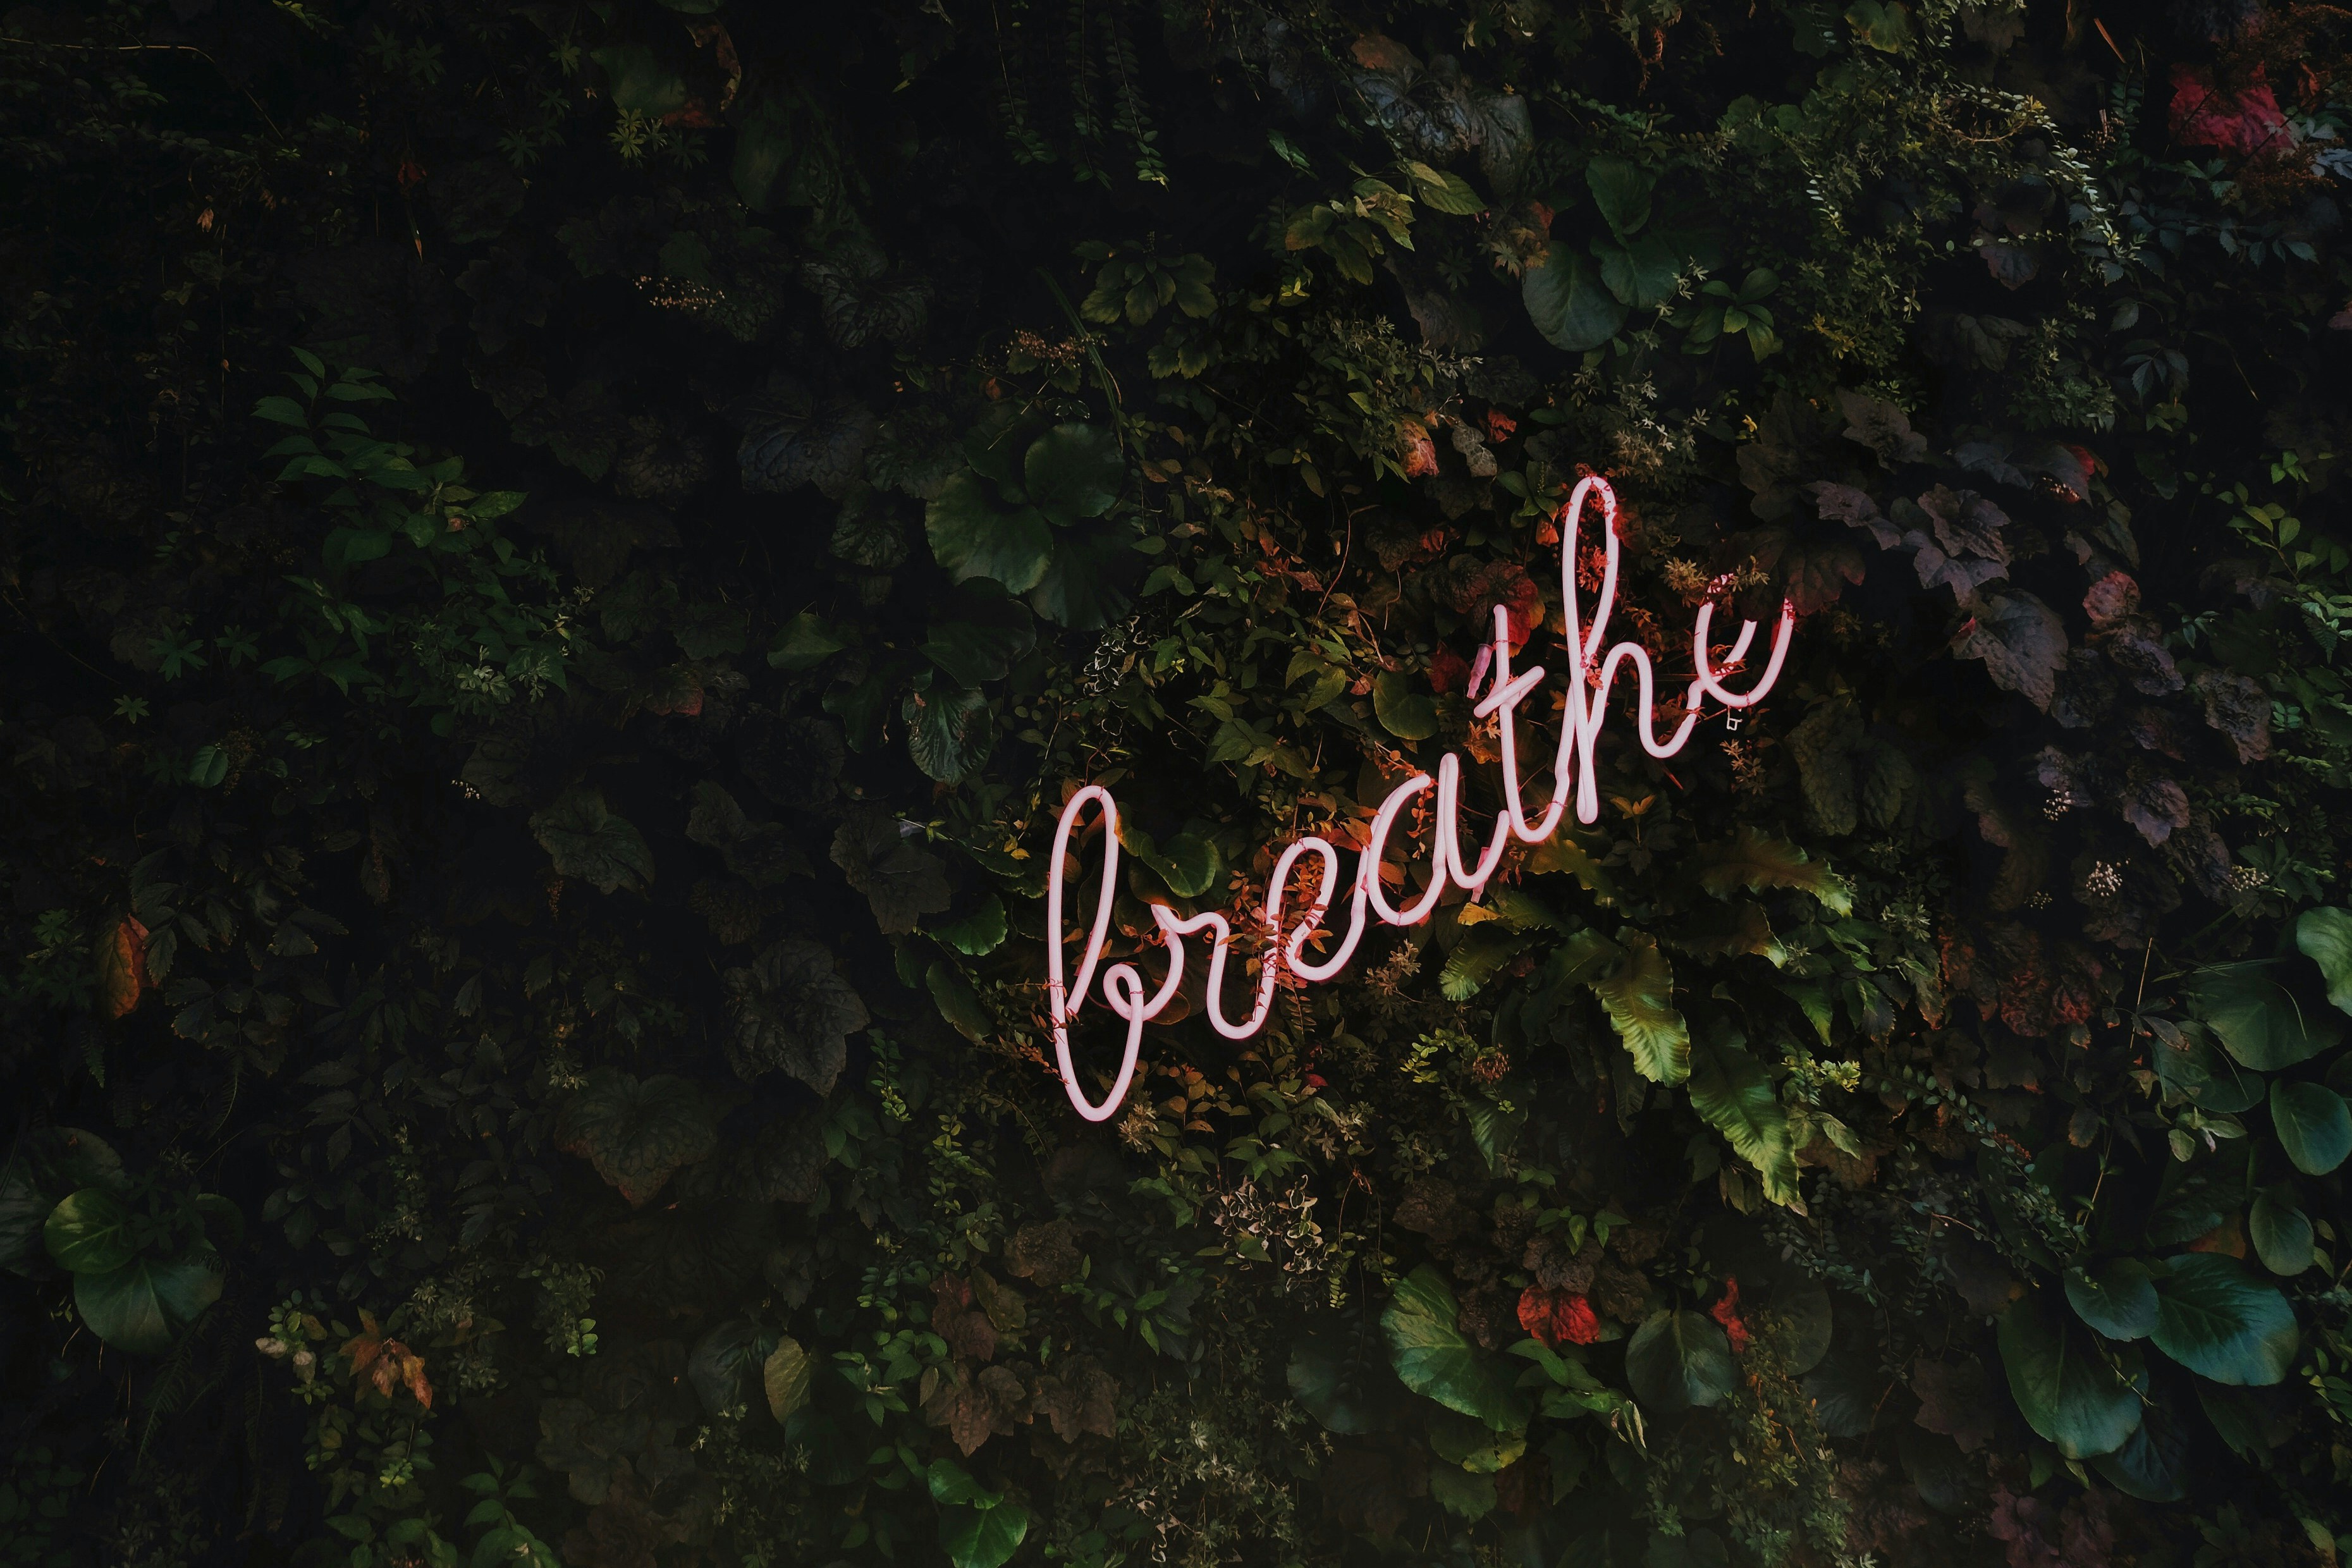 …breathe!

<p>For a full size digital copy (6000x4000px RAW+JPG) of this file, or a high quality print, please contact me via instagram: @timothy.j.goedhart, or email: tim@goedhart-lin.nl</p><div class='code-block code-block-3' style='margin: 8px auto; text-align: center; display: block; clear: both;'>
<script async src=